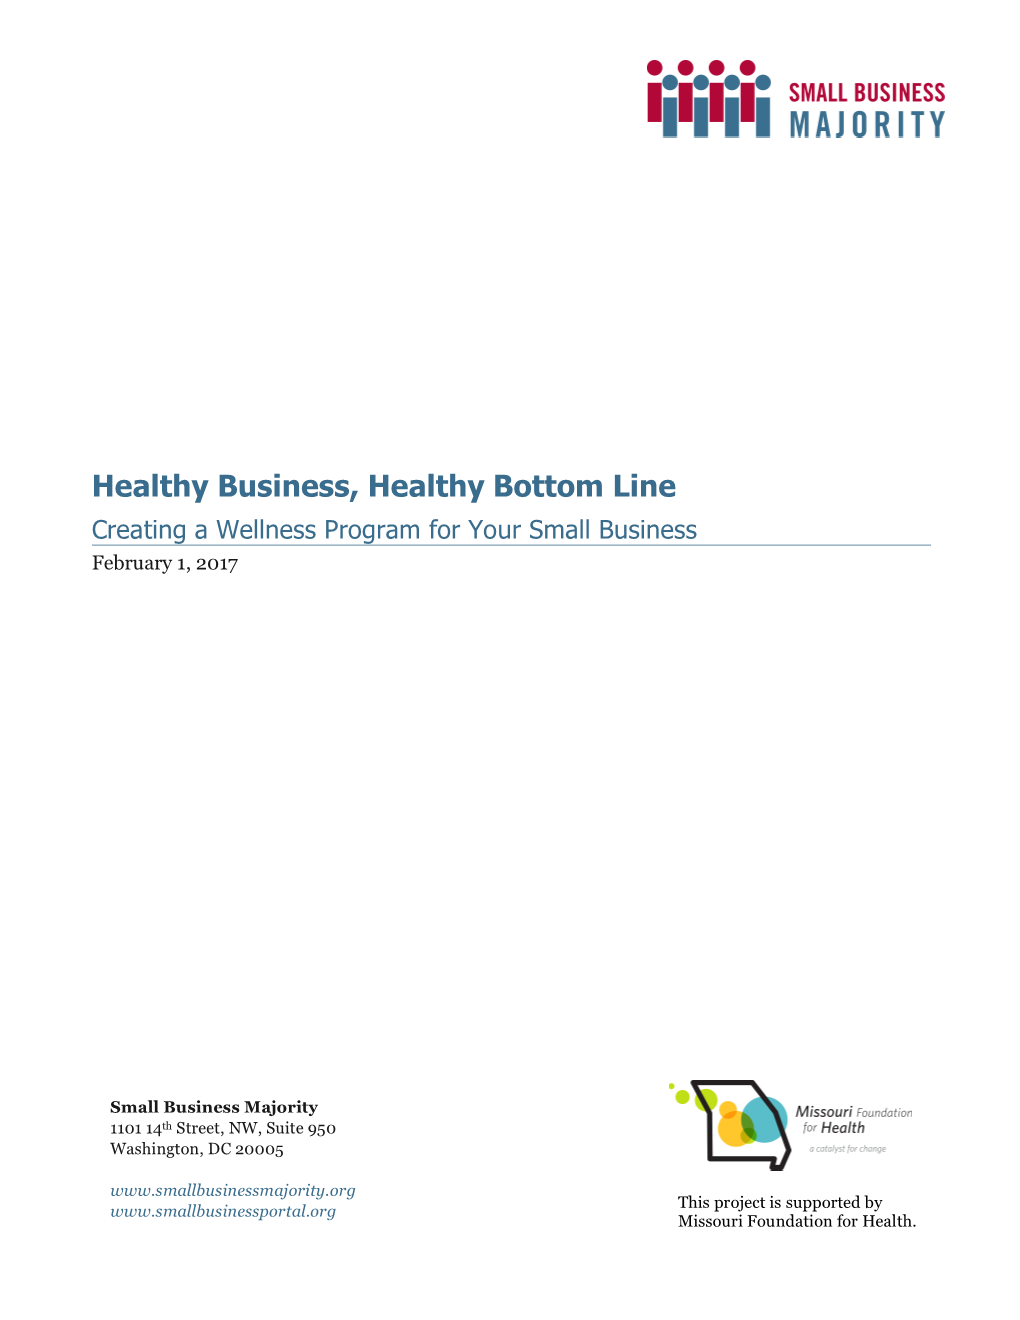 A Guide for Developing Your Workplace Wellness Program